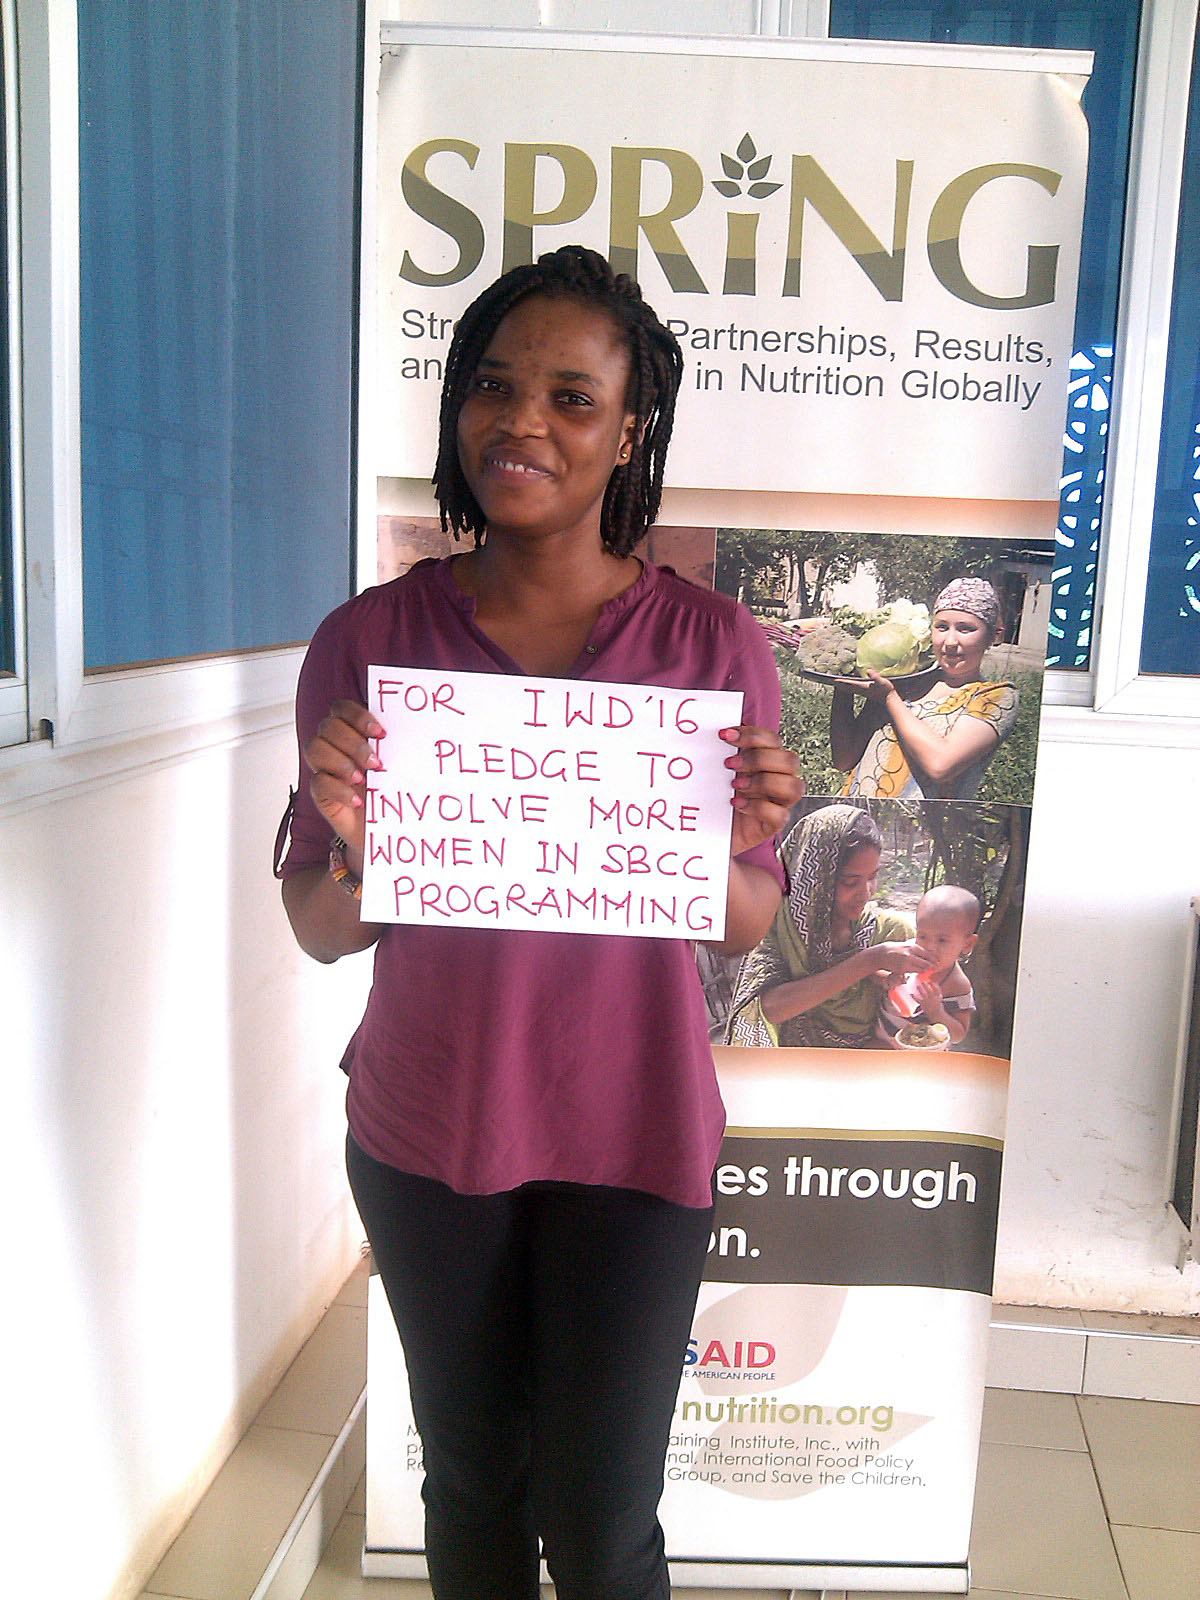 "For IWD ’16, I pledge to involve more women in SBCC programming"